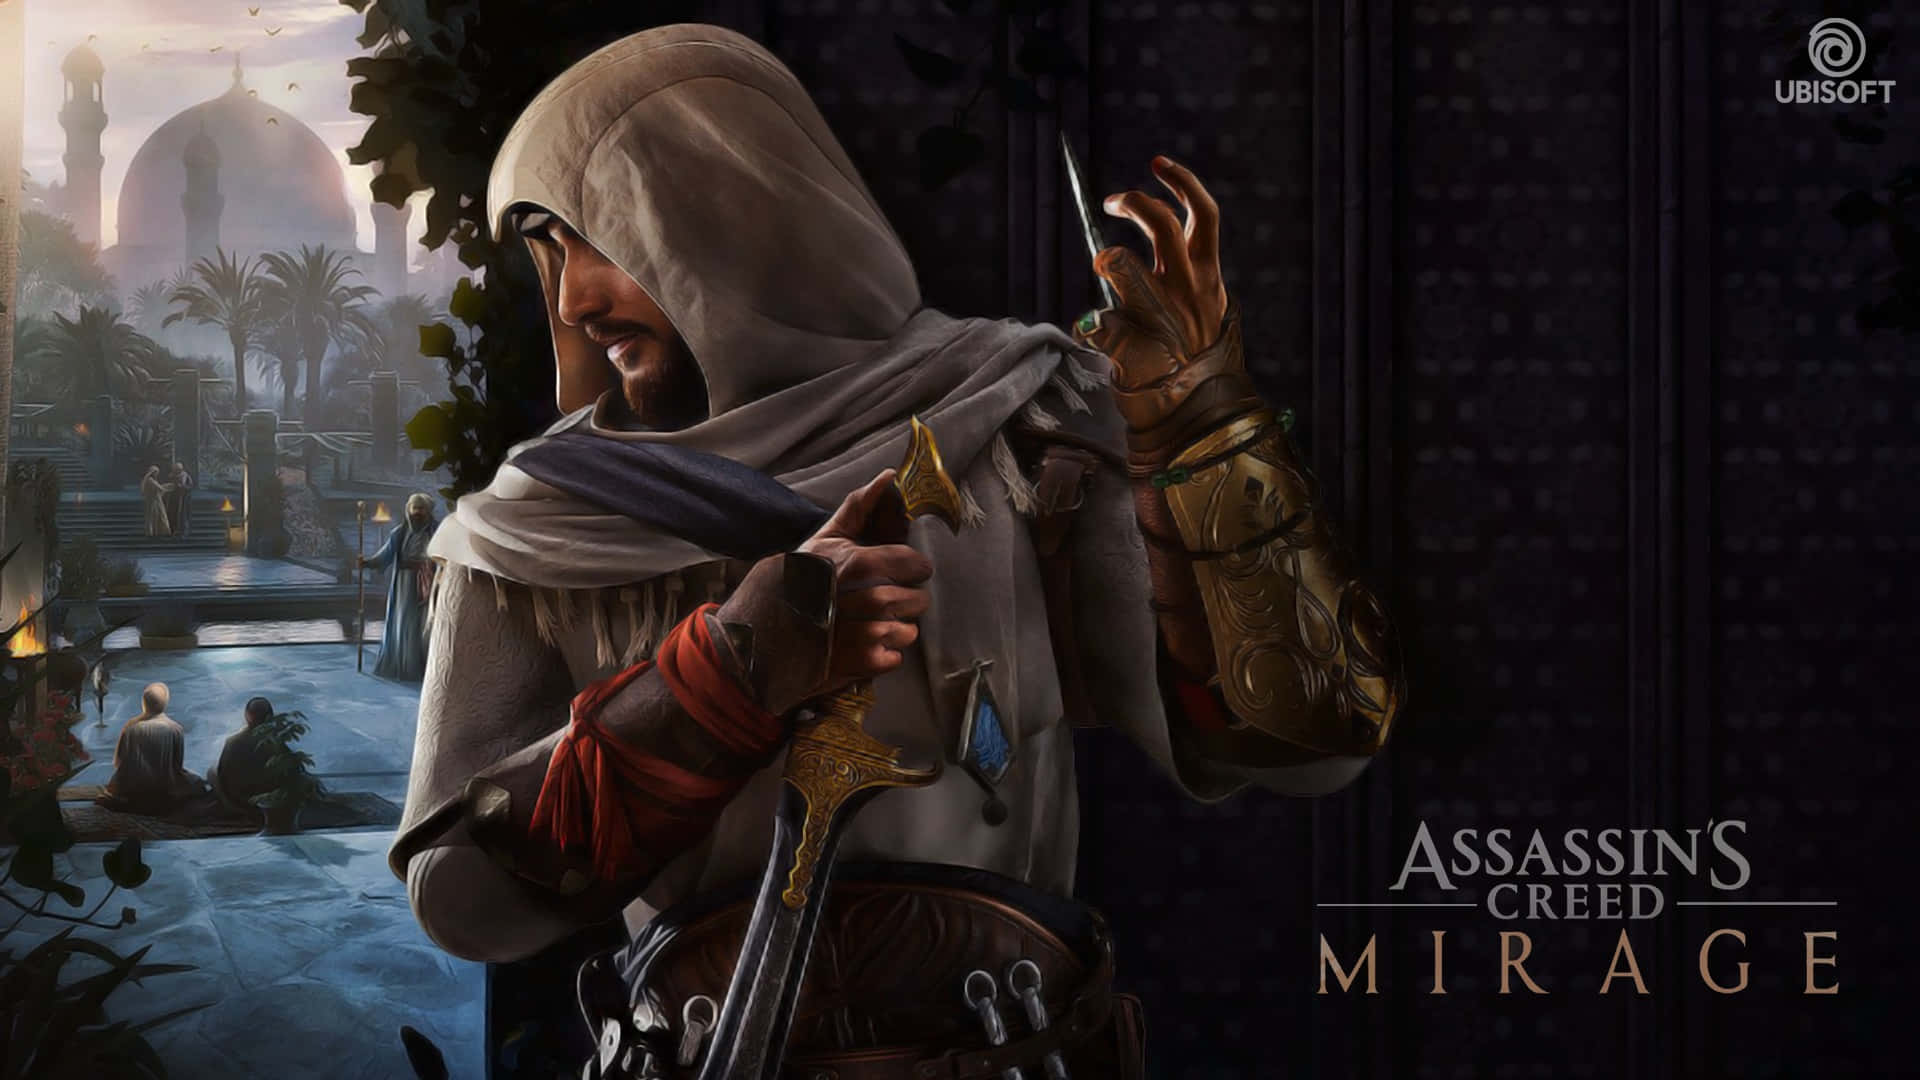 Assassin's Creed Characters Gathering Wallpaper